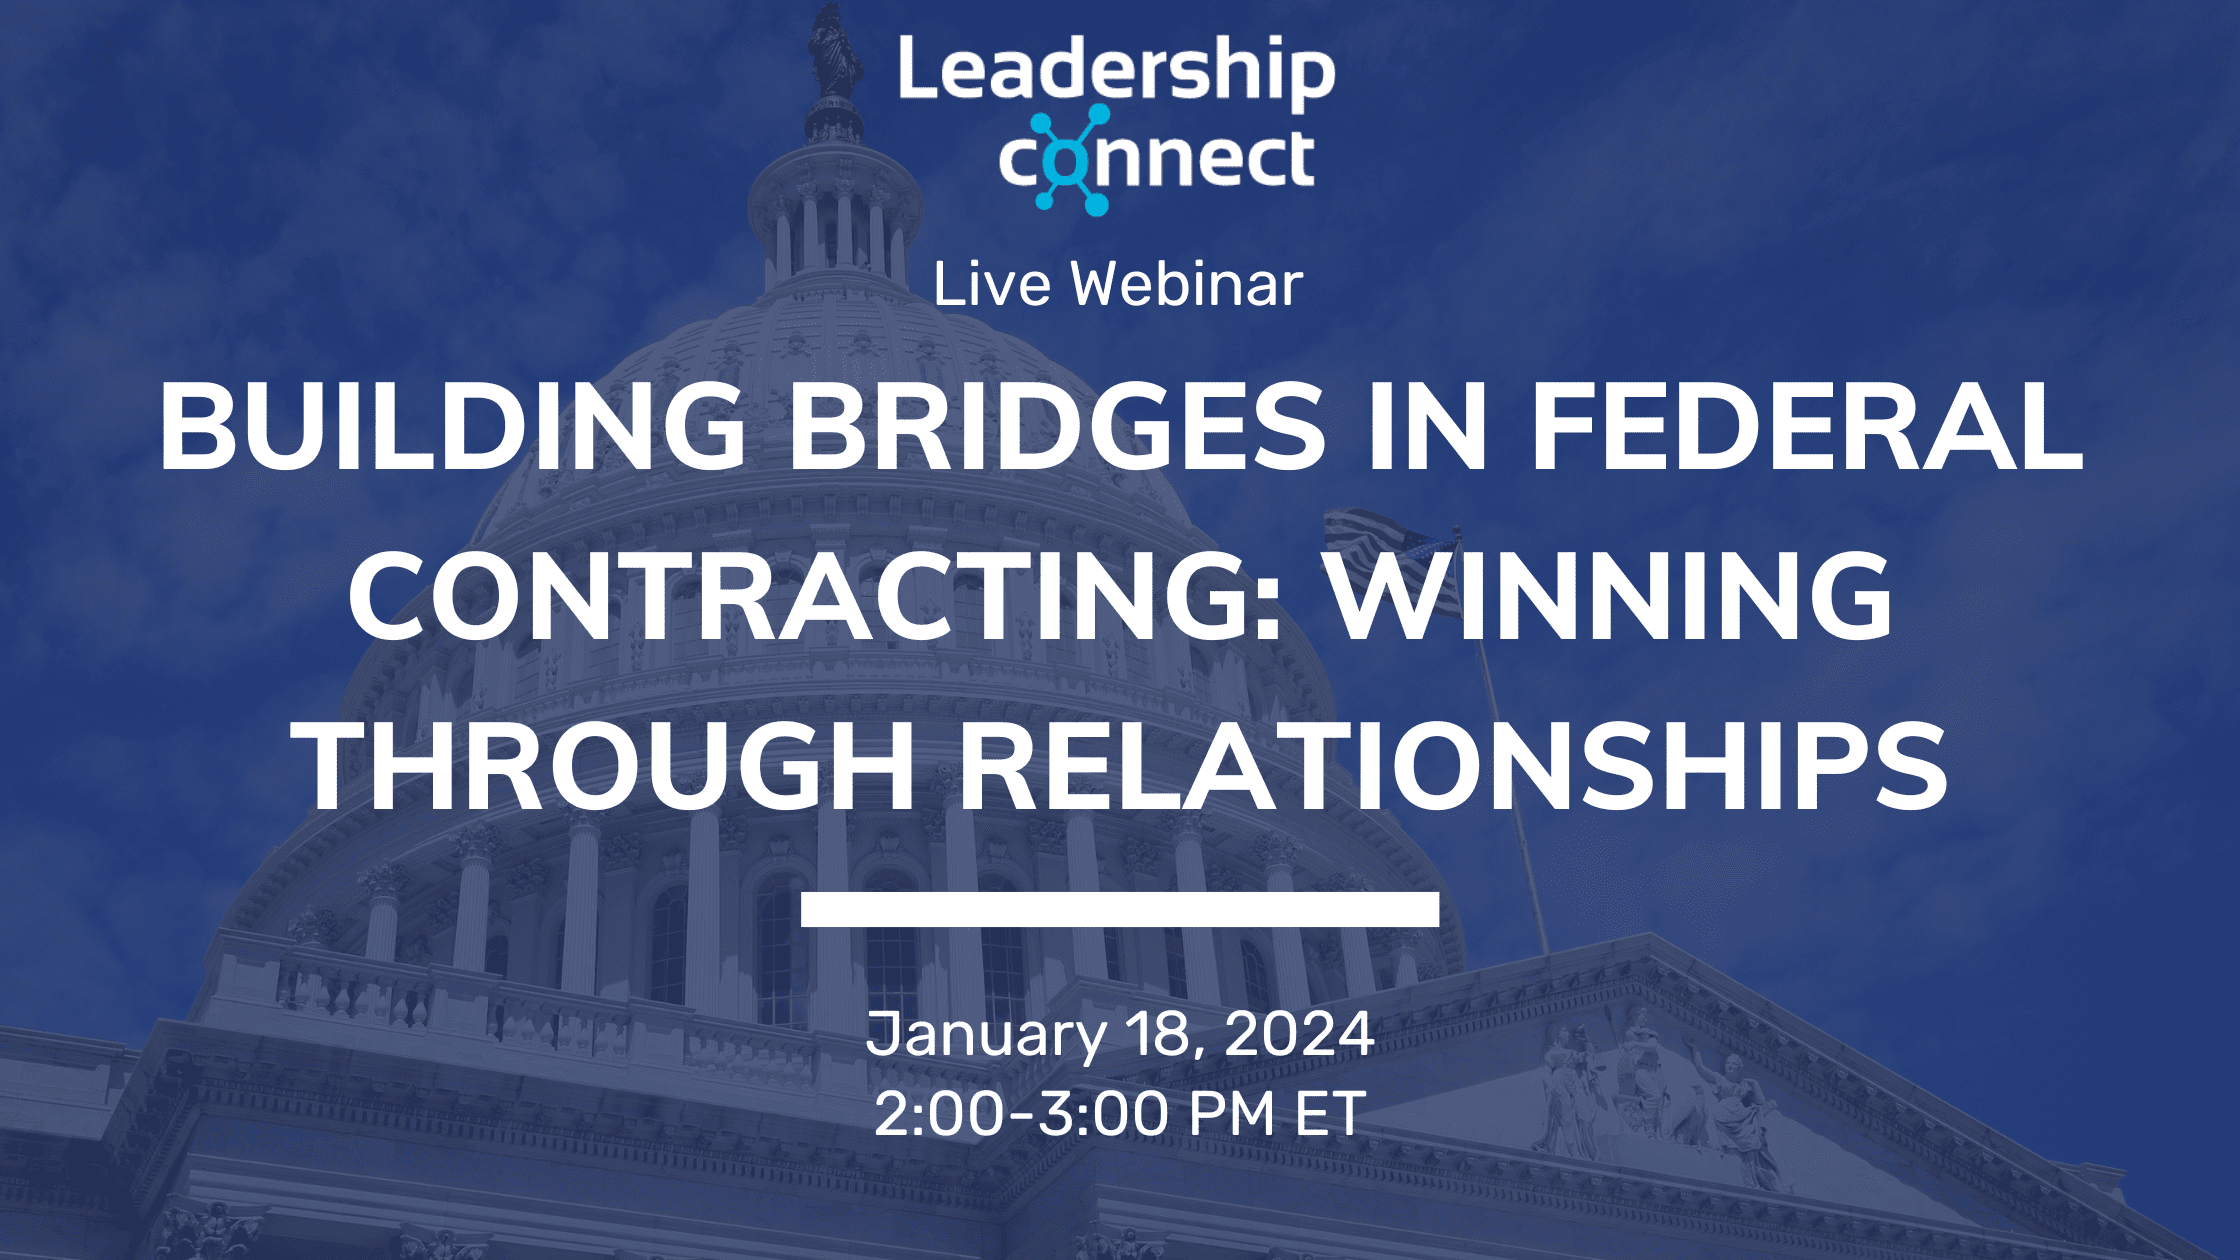 Building Bridges in Federal Contracting: Winning Through Relationships